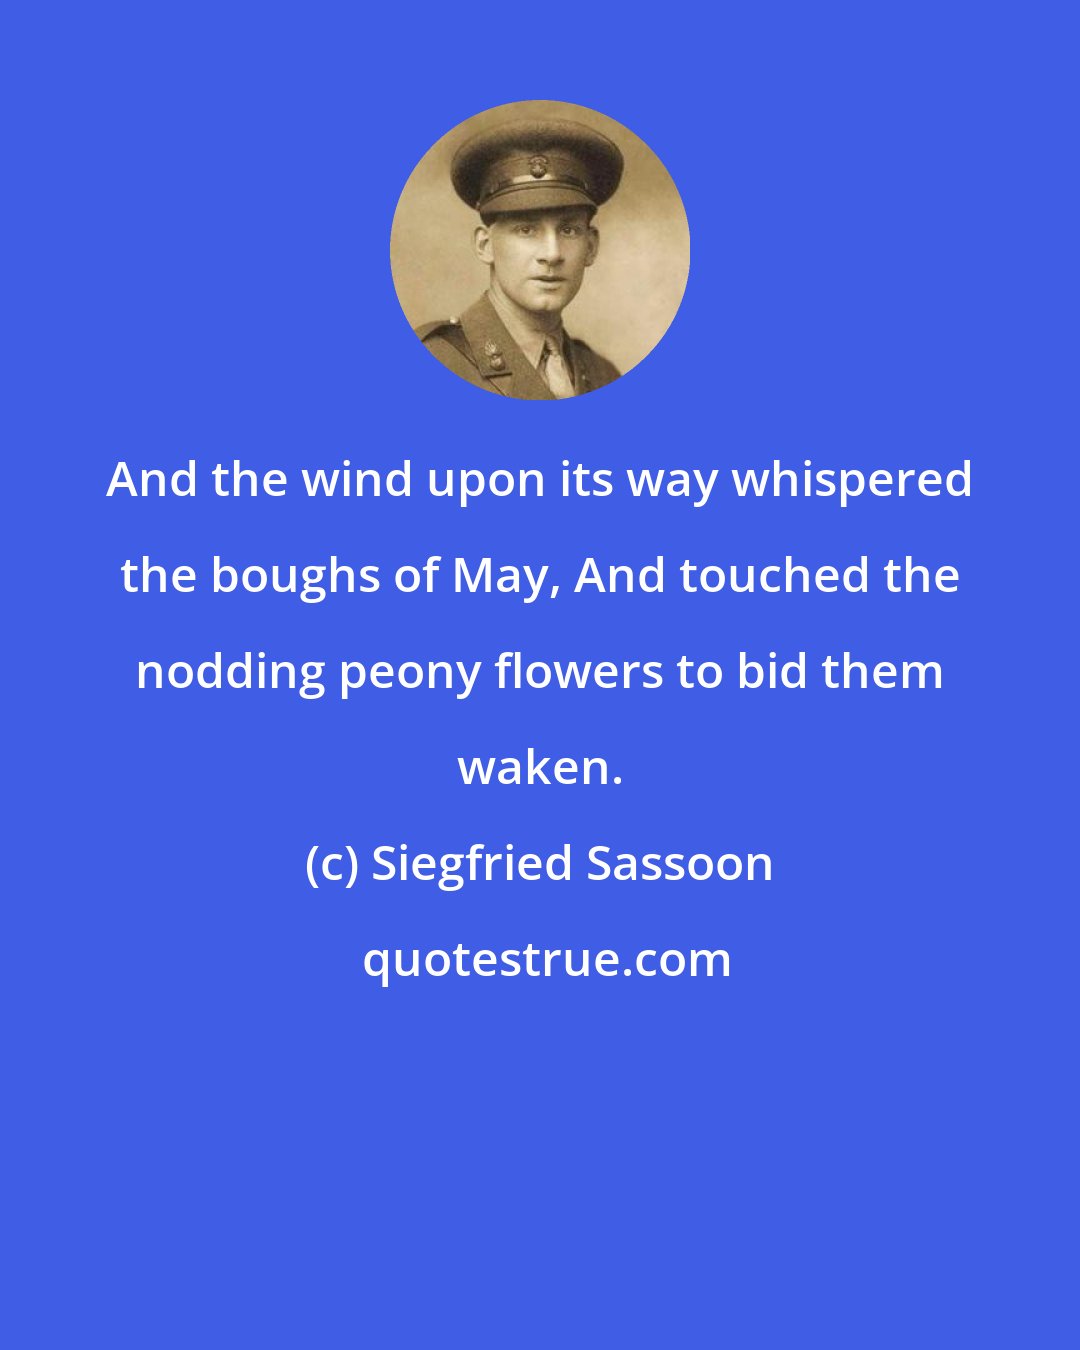 Siegfried Sassoon: And the wind upon its way whispered the boughs of May, And touched the nodding peony flowers to bid them waken.